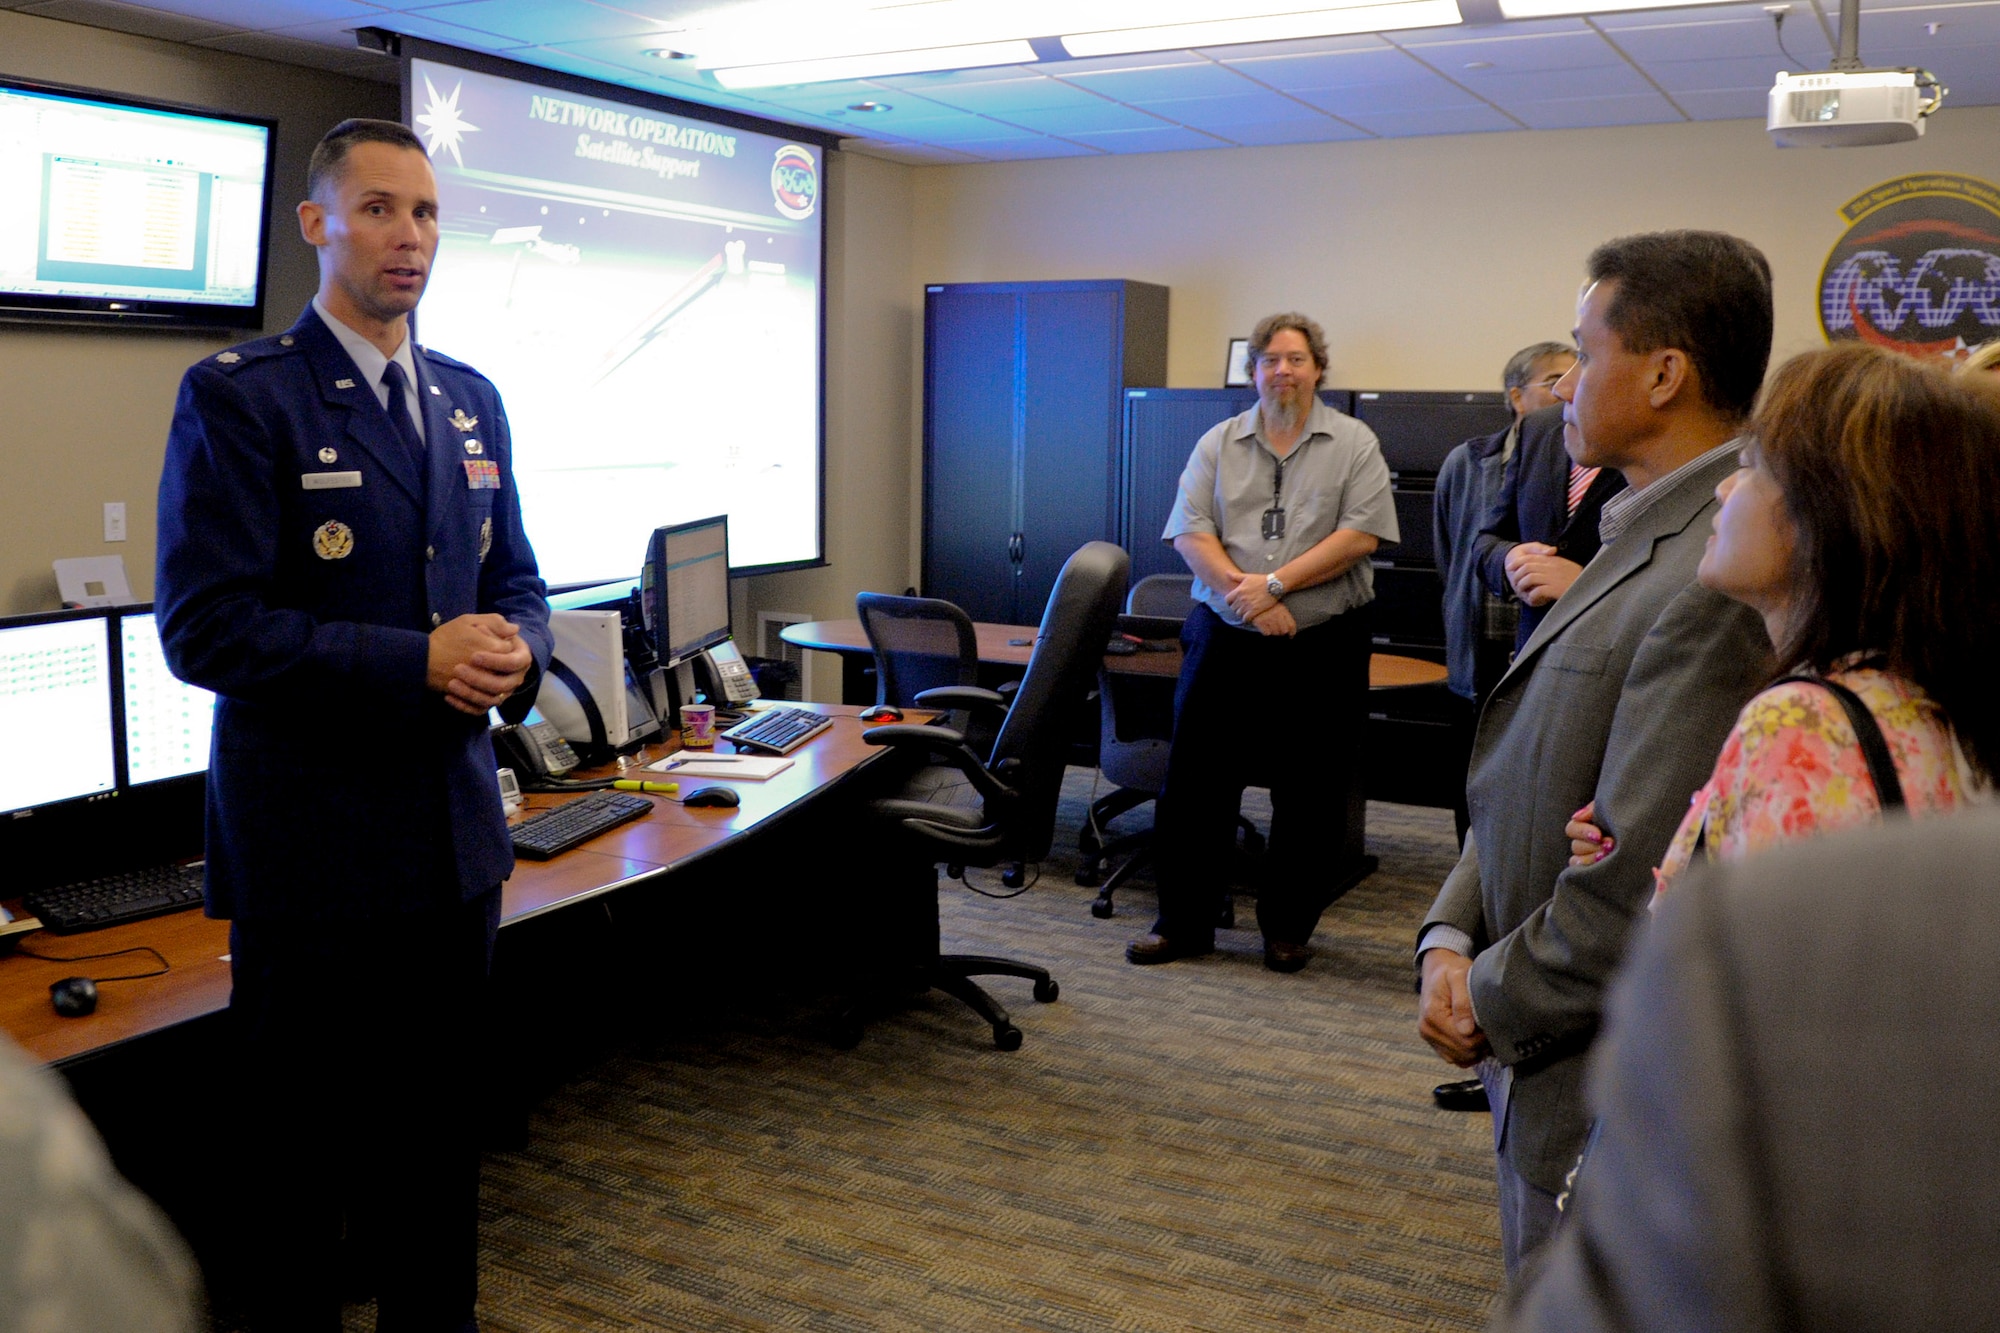 VANDENBERG AIR FORCE BASE, Calif. - Lt. Col. Michael Wulfestieg, 21st Space Operations Squadron commander, gives a tour of the 21 SOPS complex during a birthday celebration for the squadron here, Friday, Oct. 5, 2012. Active since 1991, the 21 SOPS handles the day-to-day operation and maintenance of the Air Force Satellite Control Network as well as ground antennas and monitoring stations. (U.S. Air Force photo/Staff Sgt. Levi Riendeau)
